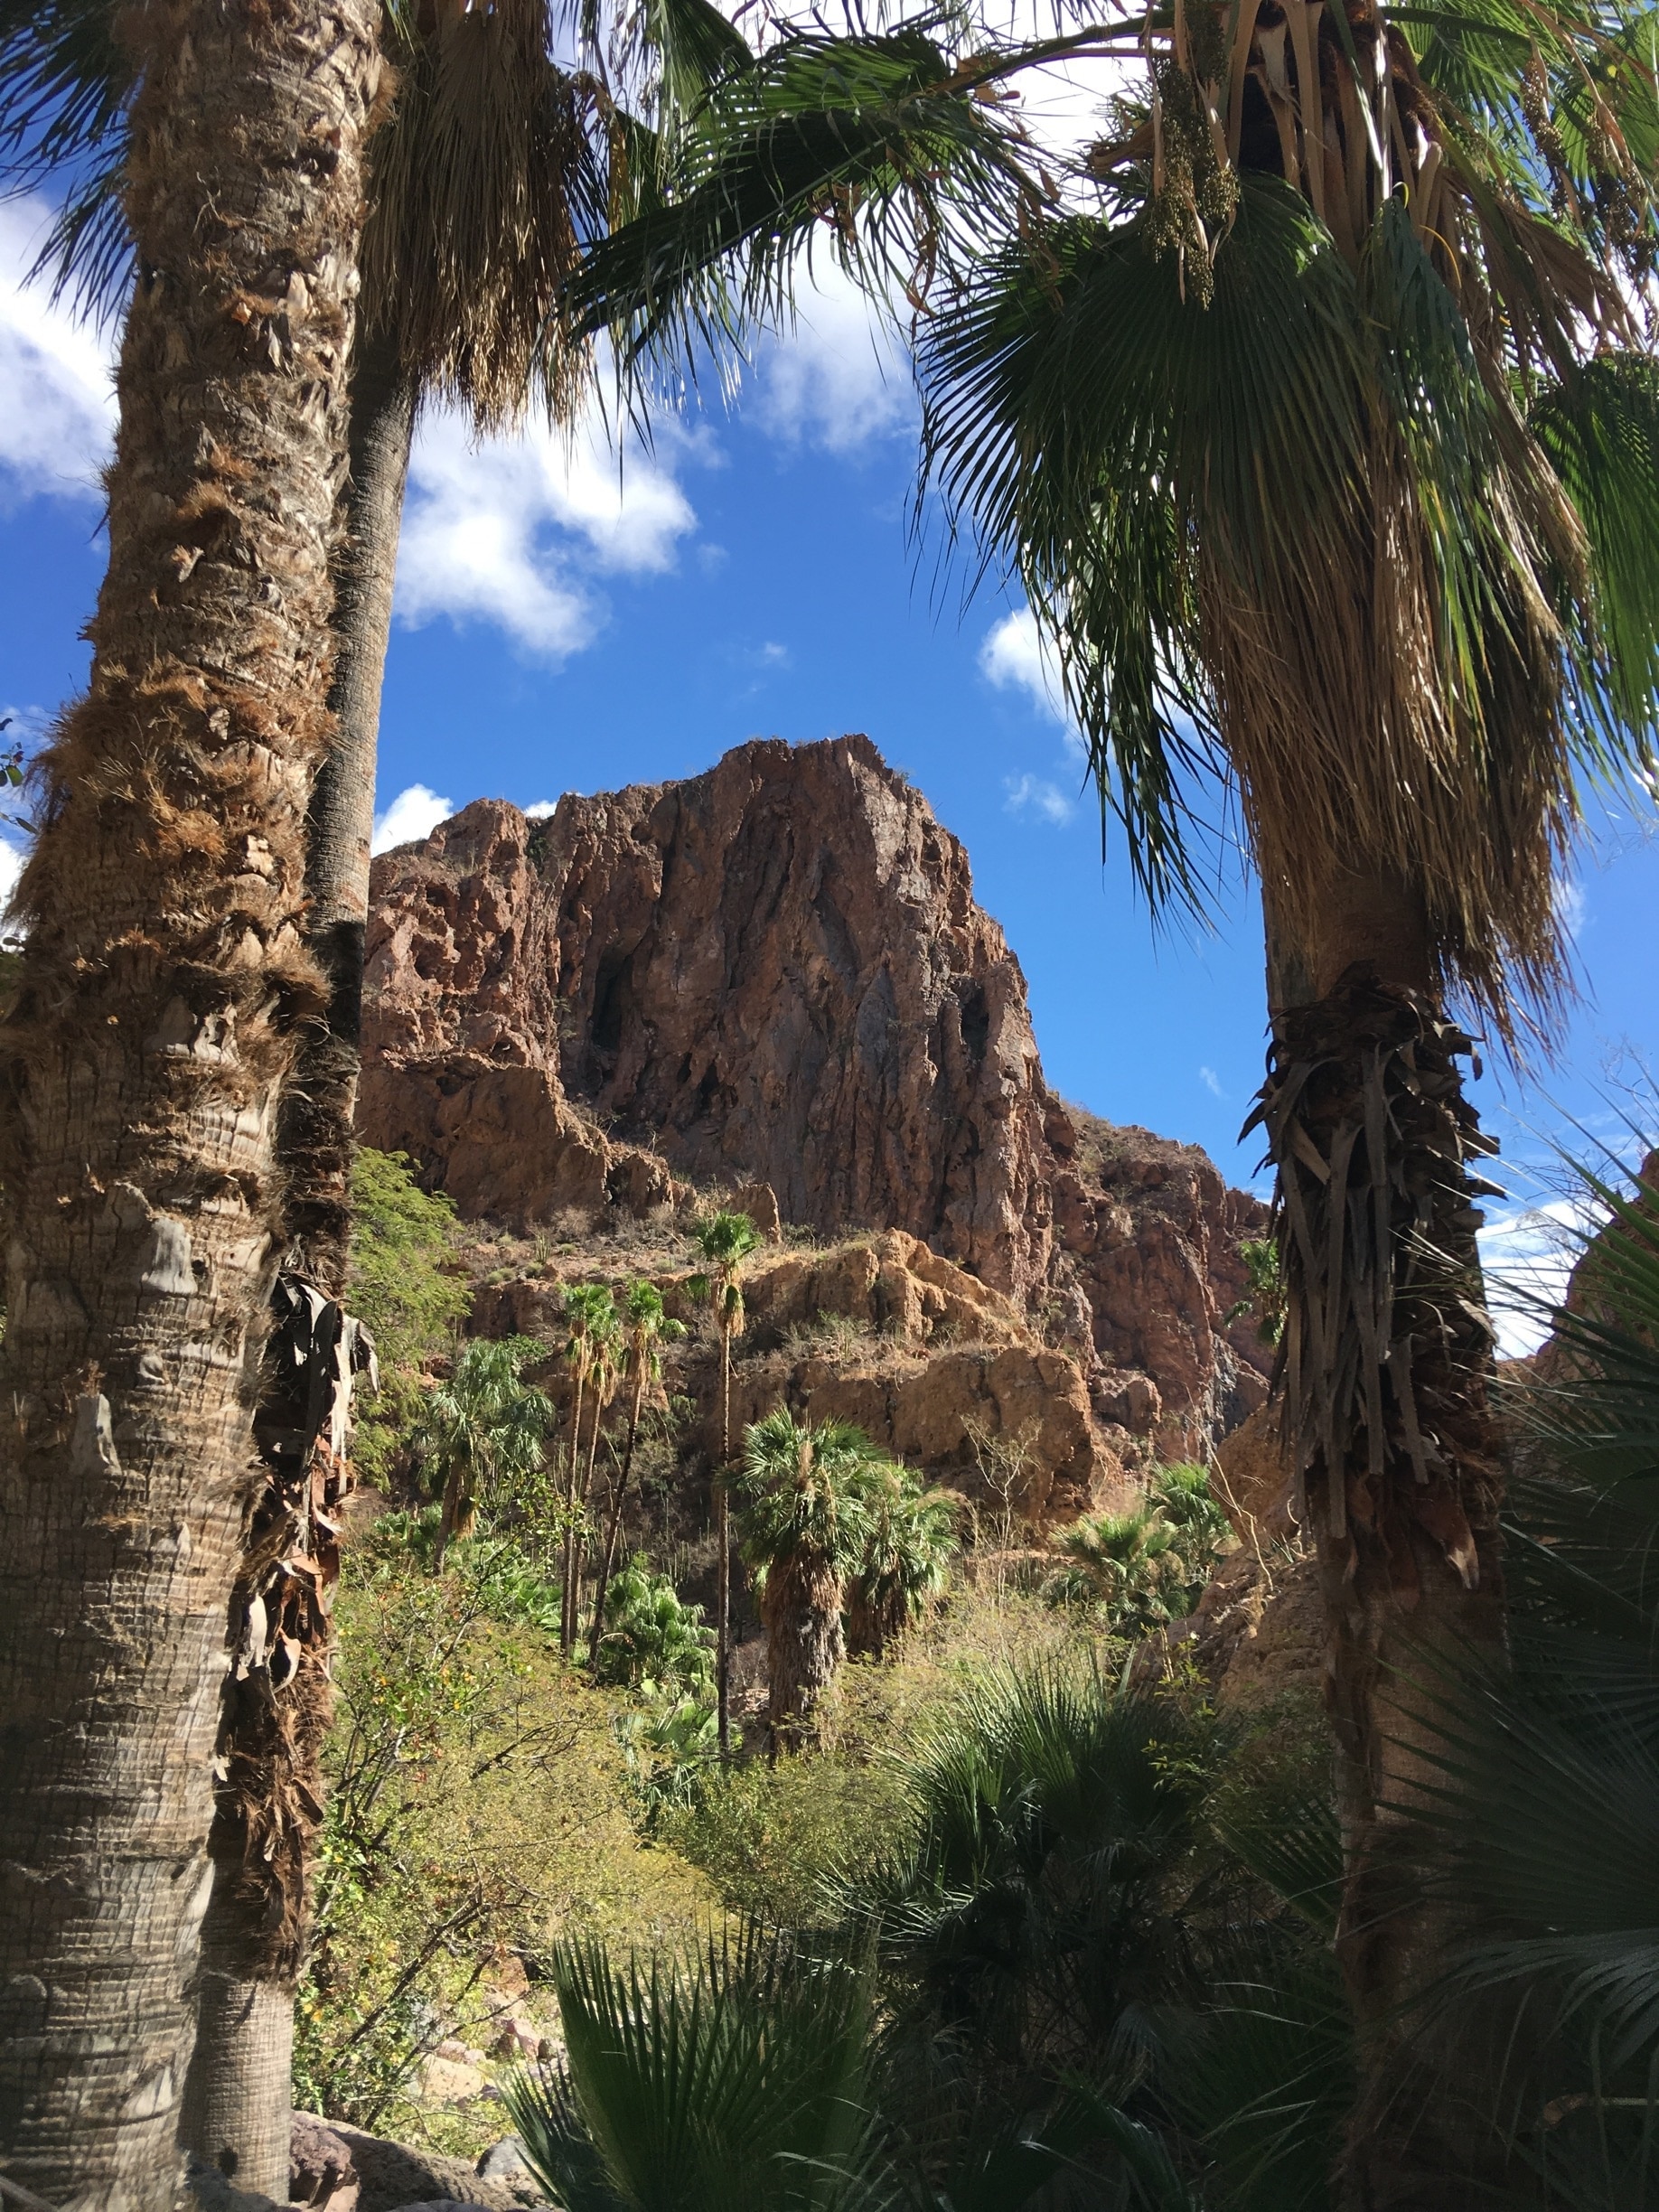 Nacapule Canyon near San Carlos, Sonora, Mexico. 

Hiked today to the top pool. Interesting to see palms growing in the canyon. 

#Mexico #hiking 

(Feb 2018)